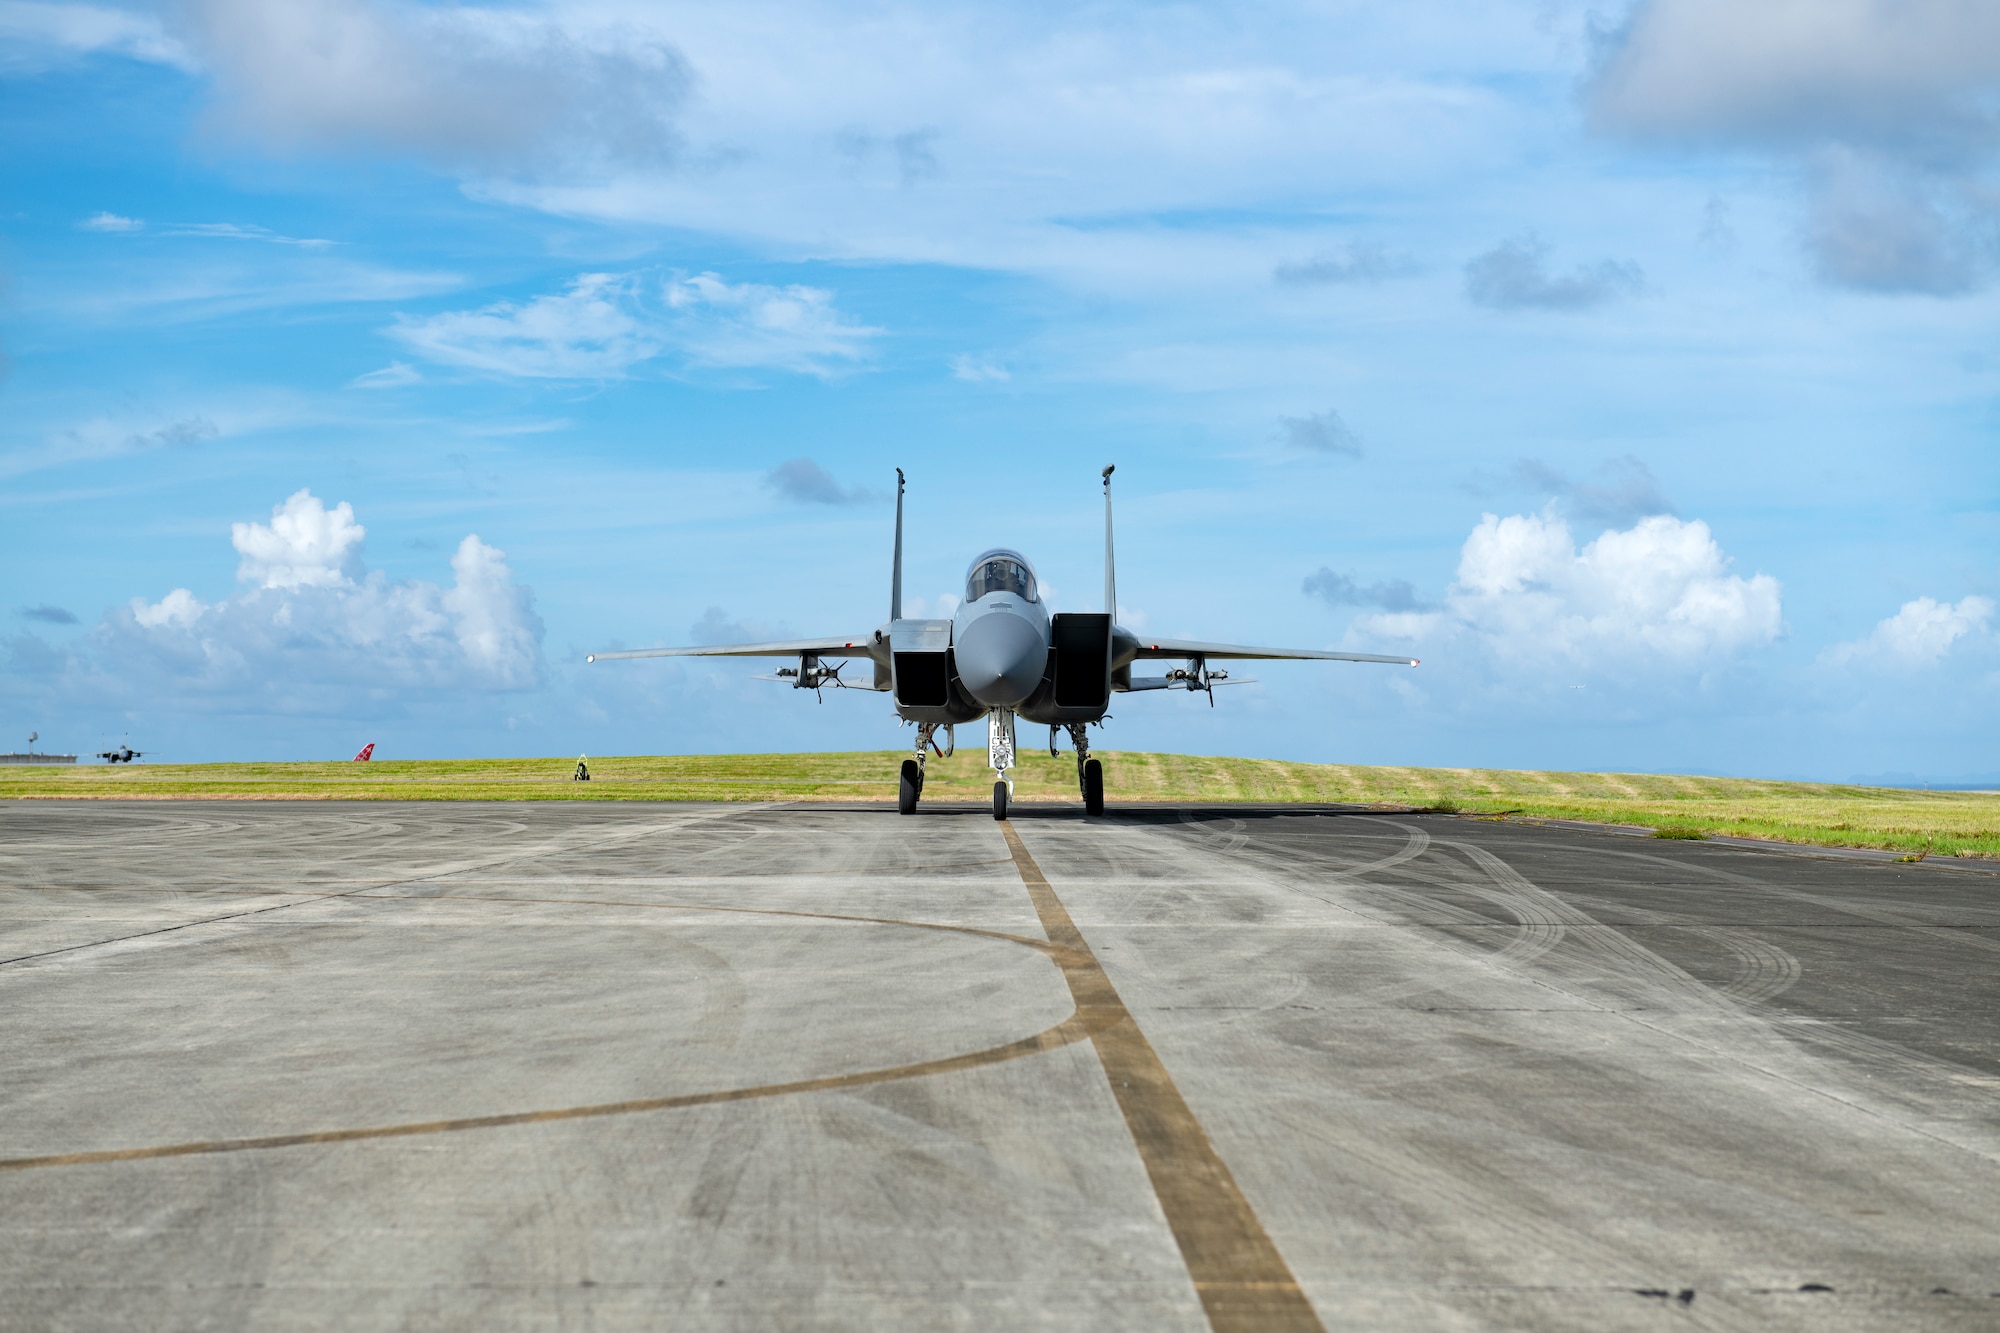 An F-15C Eagle assigned to the 44th Fighter Squadron waits on the service apron to receive hot-pit refueling between sorites in support of surge operations at Kadena Air Base, Japan, Aug. 24, 2022. Surge operations provide aircrew and support personnel the opportunity to train the skills necessary to maintain a ready force, capable of ensuring the collective defense of the Indo-Pacific region. (U.S. Air Force photo by Senior Airman Jessi Roth)